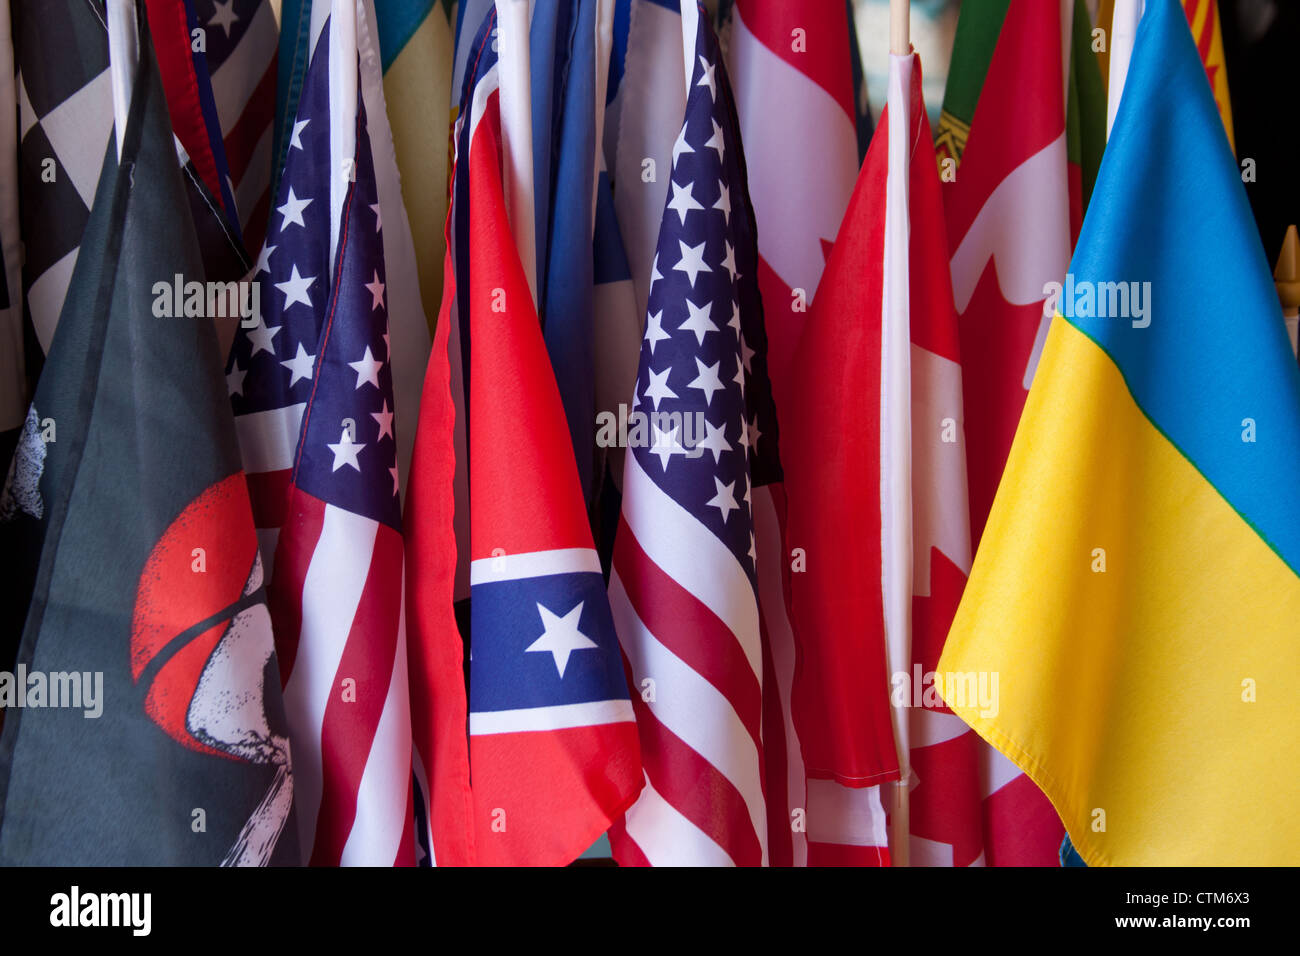 Many Flags from many nations Stock Photo